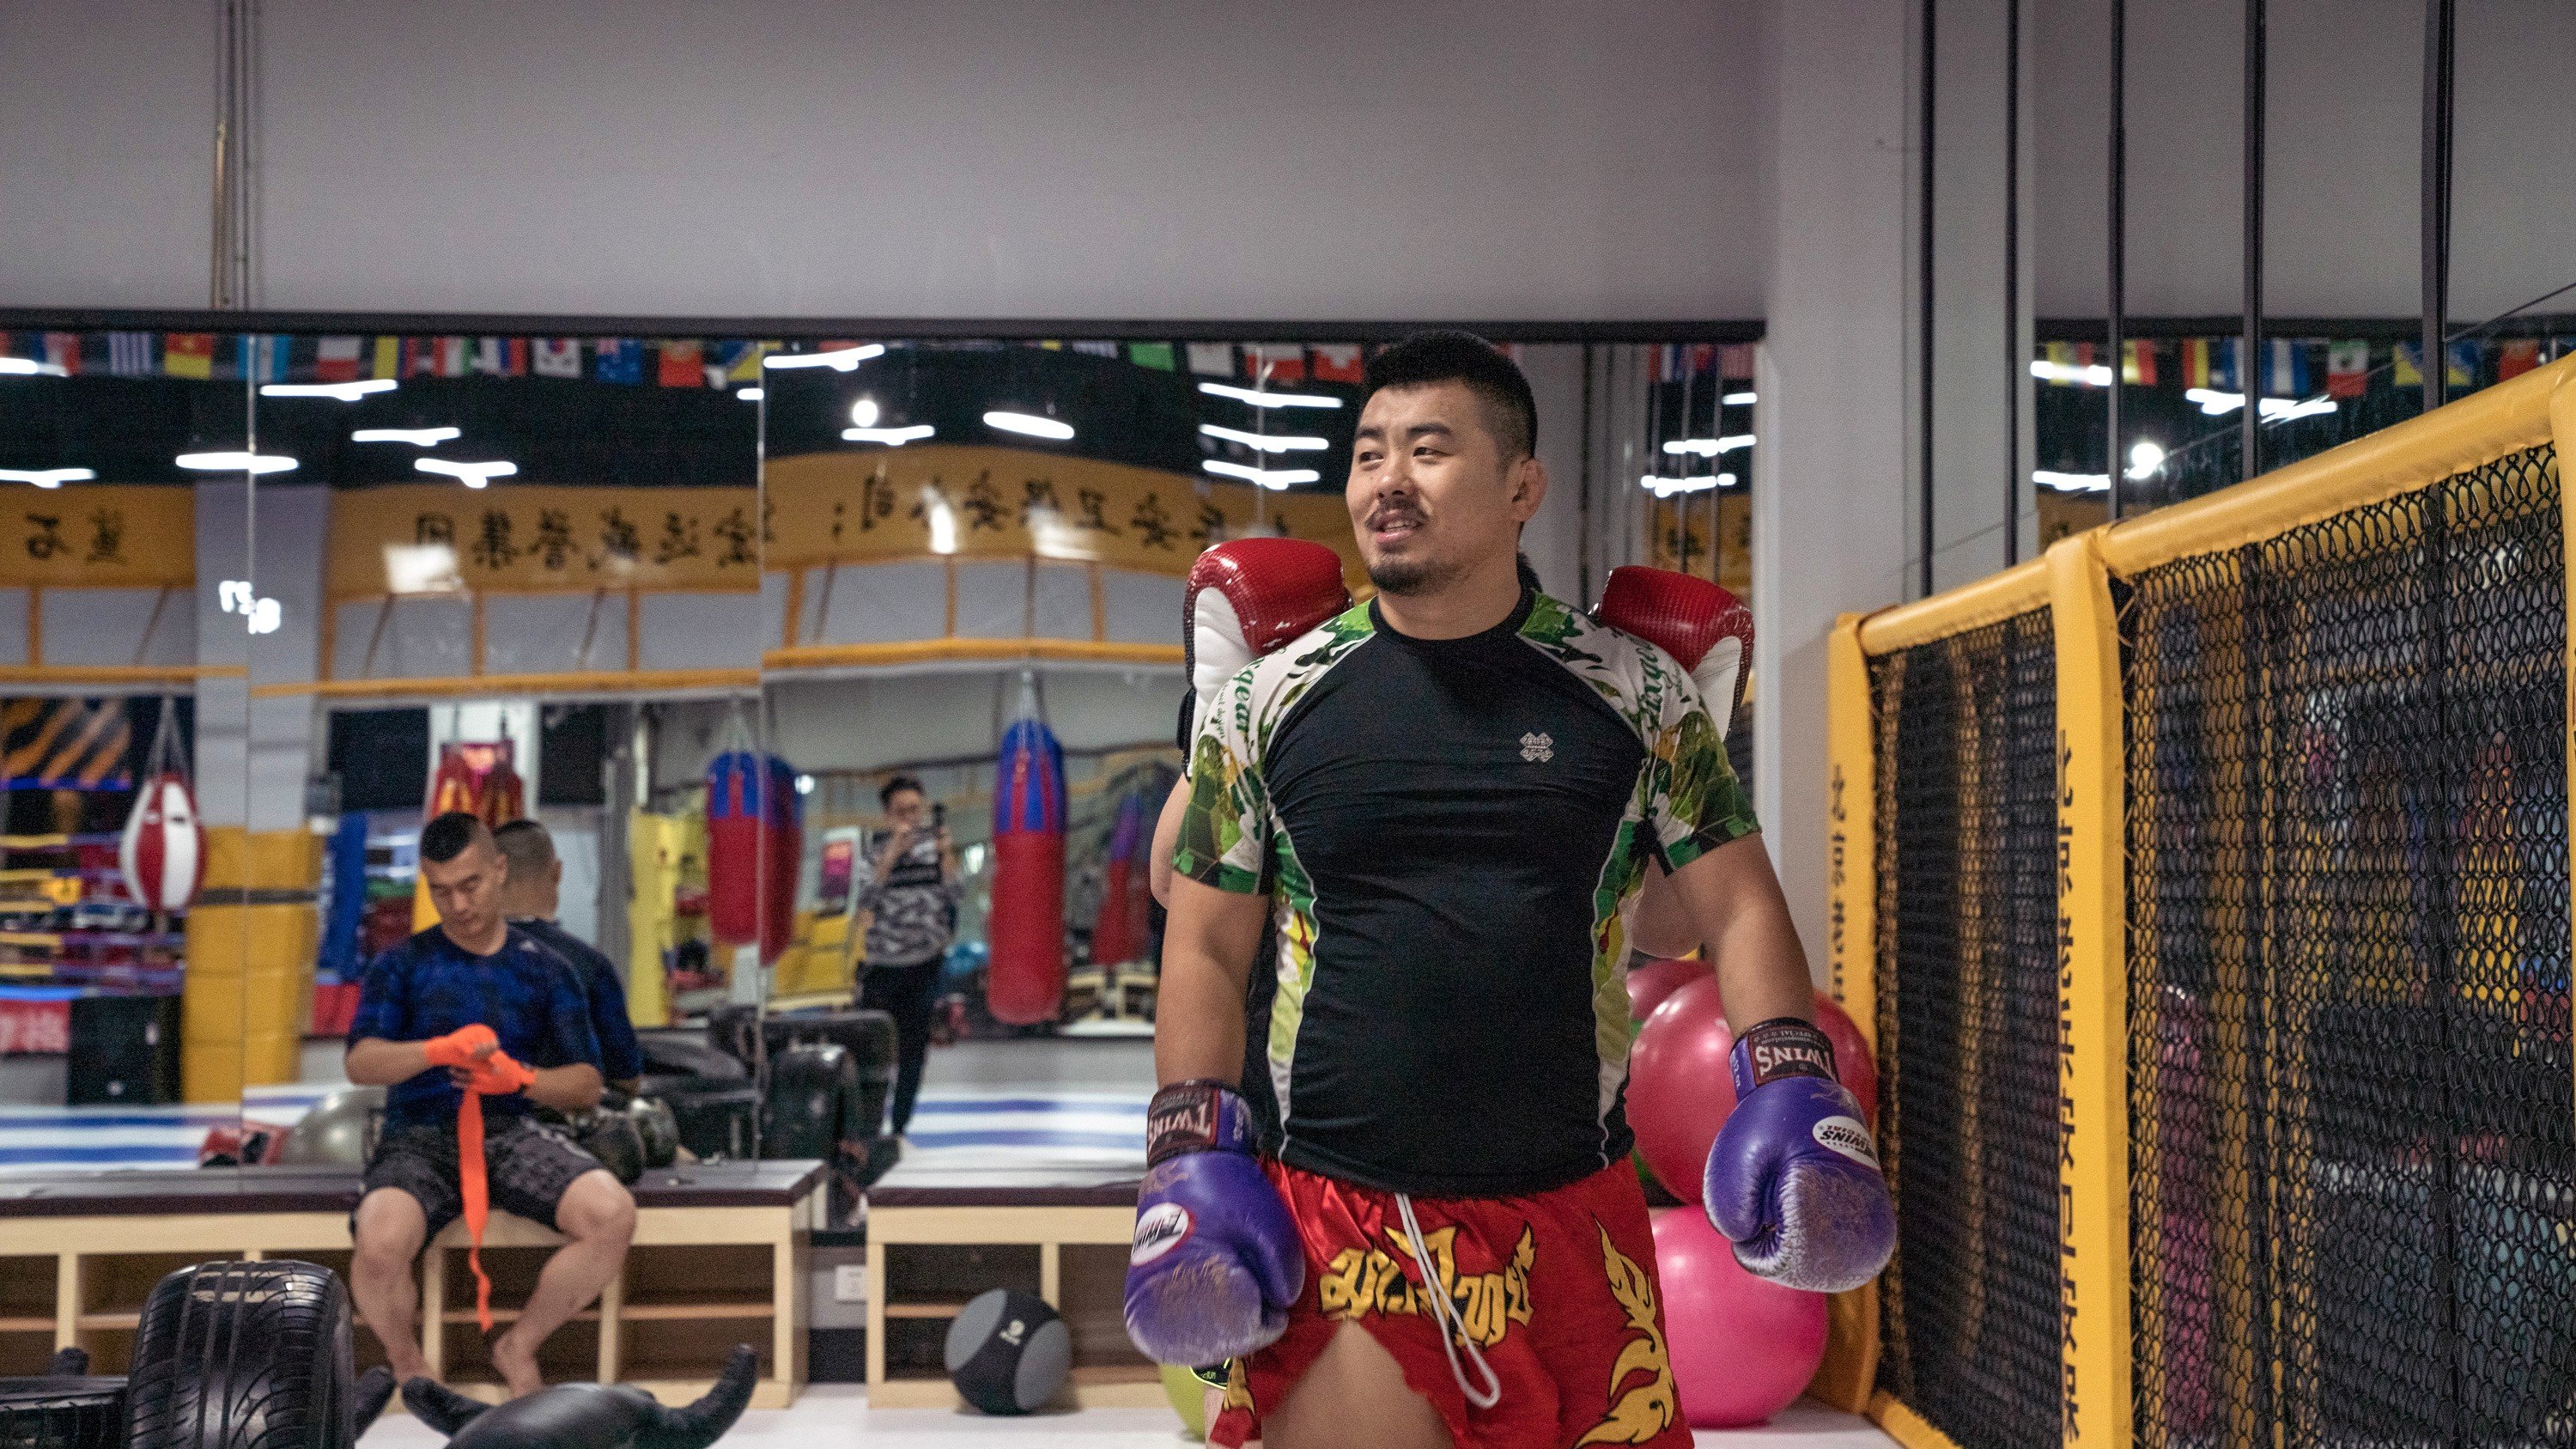 Controversial Chinese mixed martial arts fighter Xu Xiaodong in training for the biggest fight of his career. Photo: Qin Chen